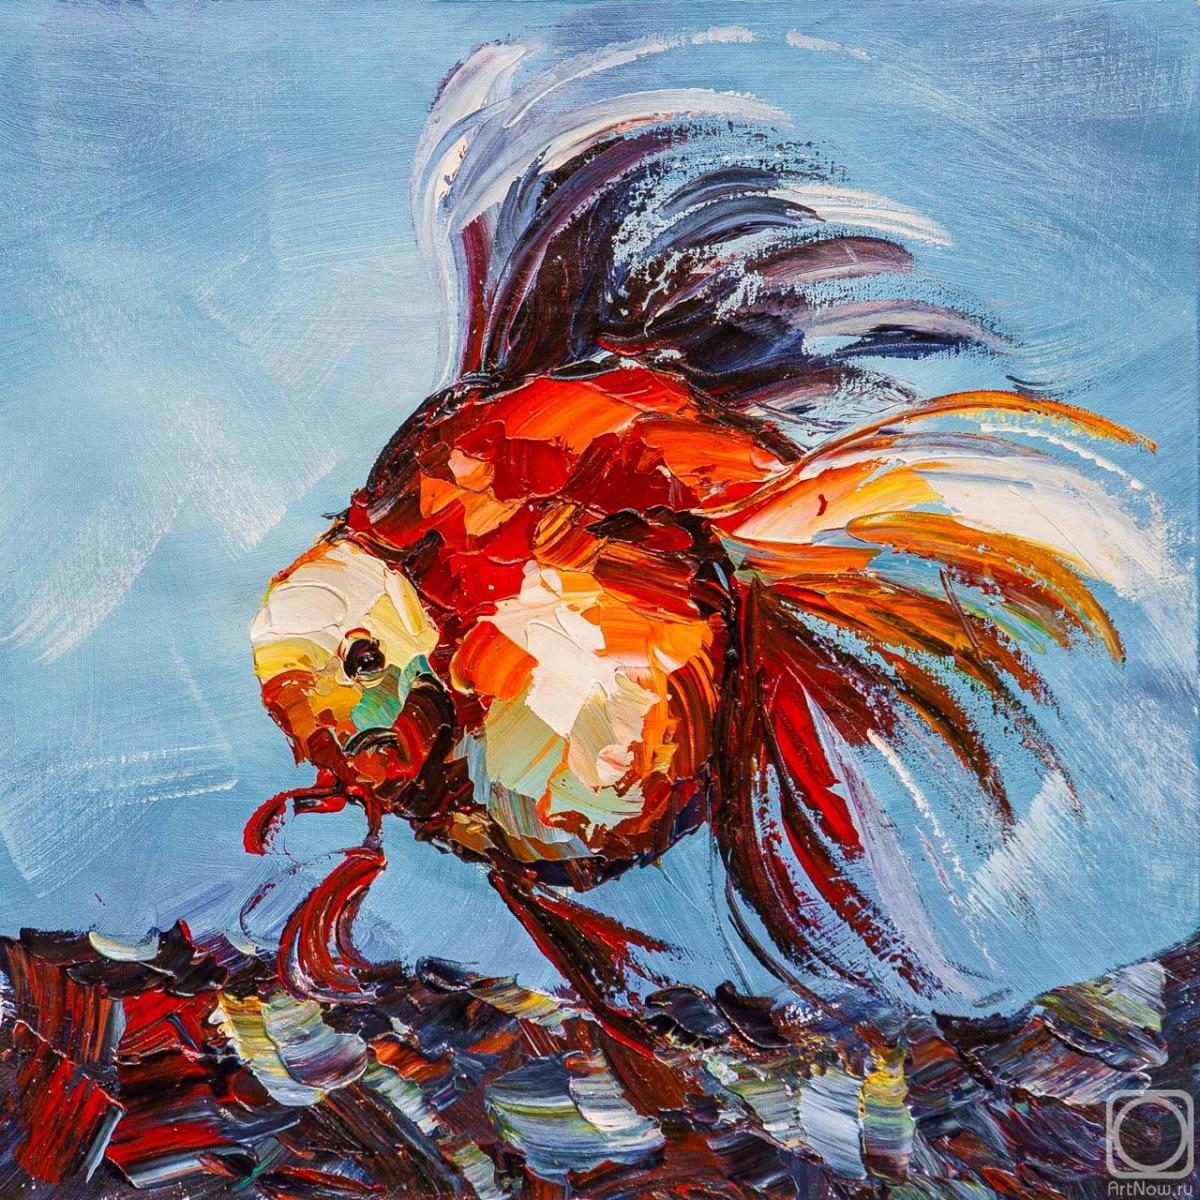 Rodries Jose. Goldfish for the fulfillment of desires. N2